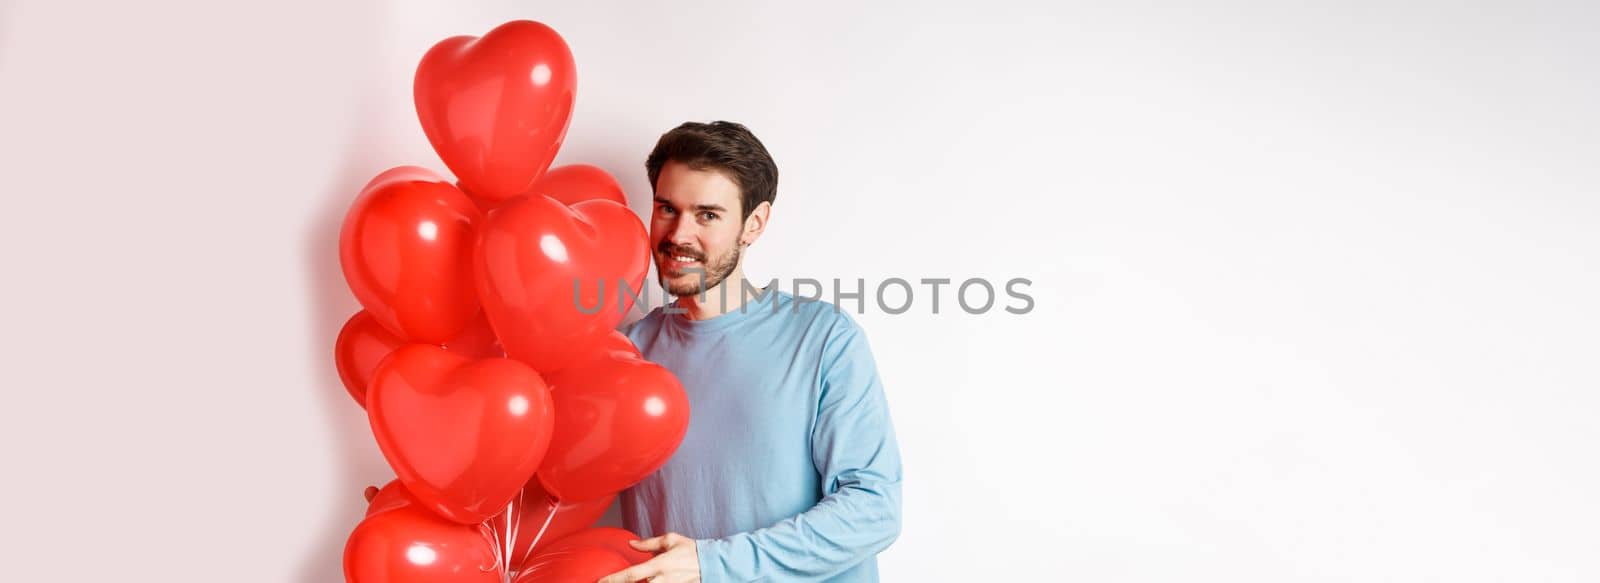 Romantic boyfriend bring red hearts balloons on Valentines day, surprise lover on date, standing over white background.